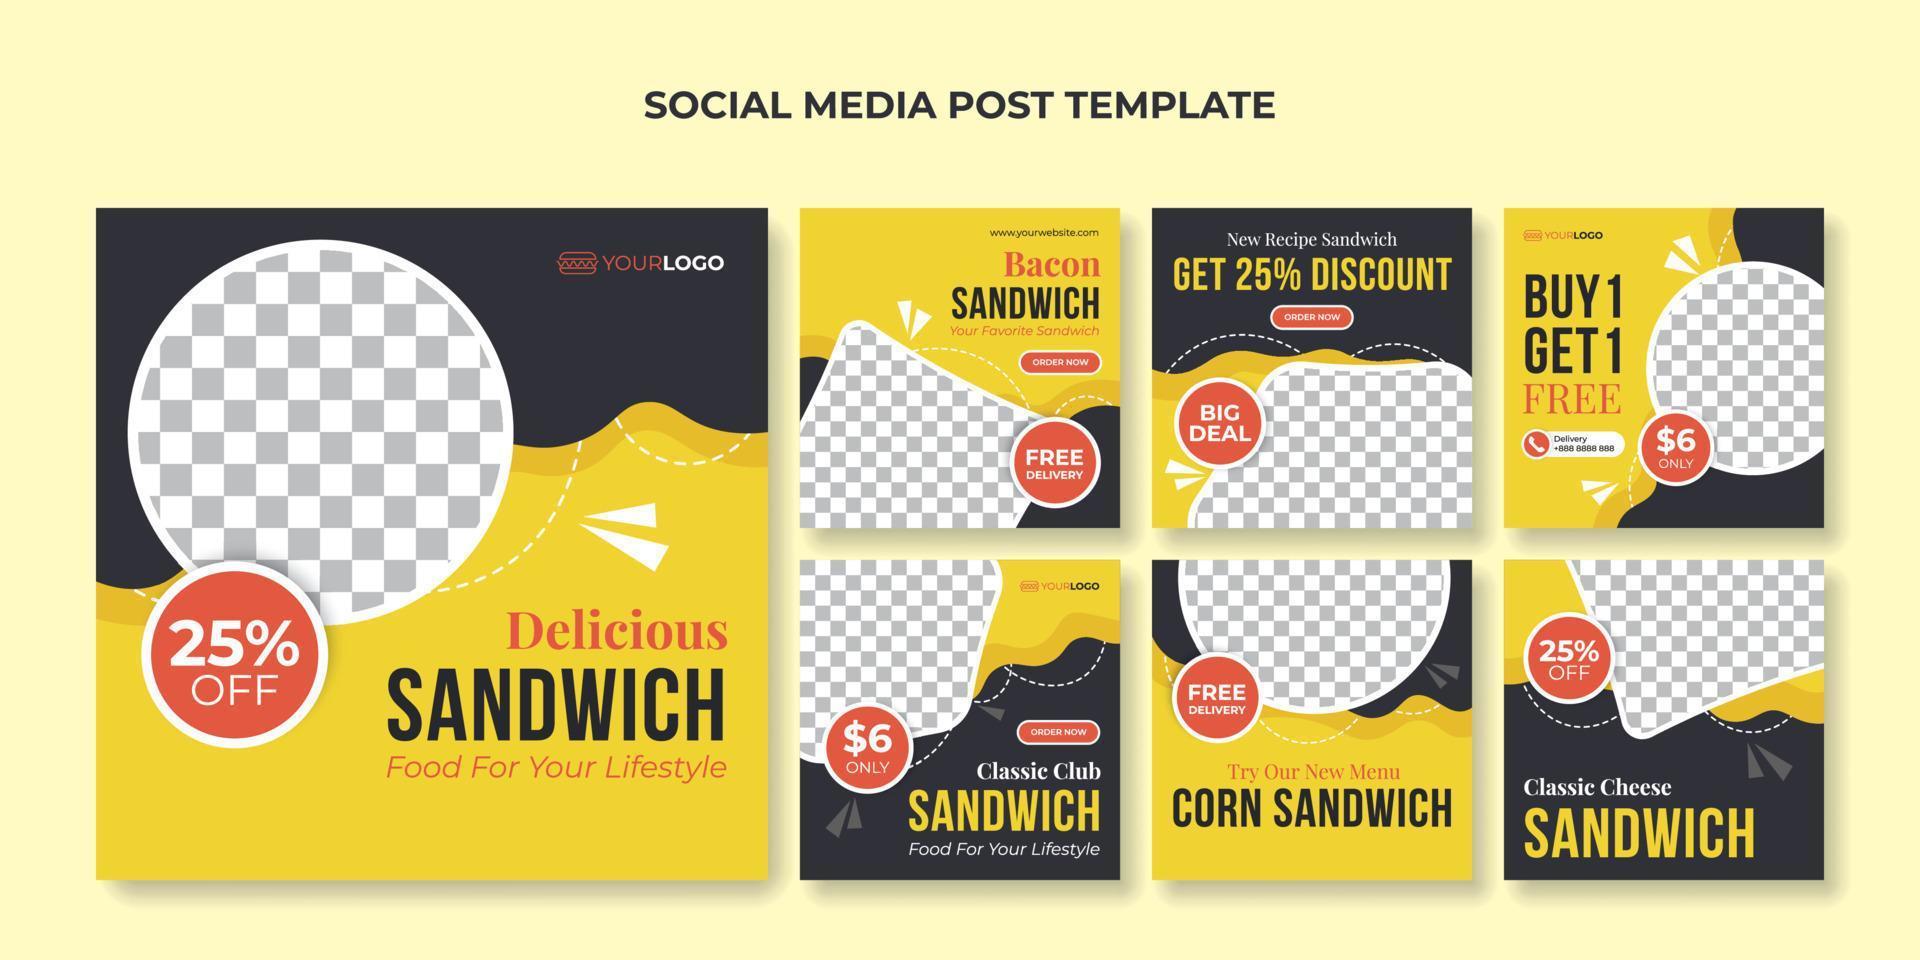 Delicious sandwich social media post template. Food square banner for fast food restaurant vector